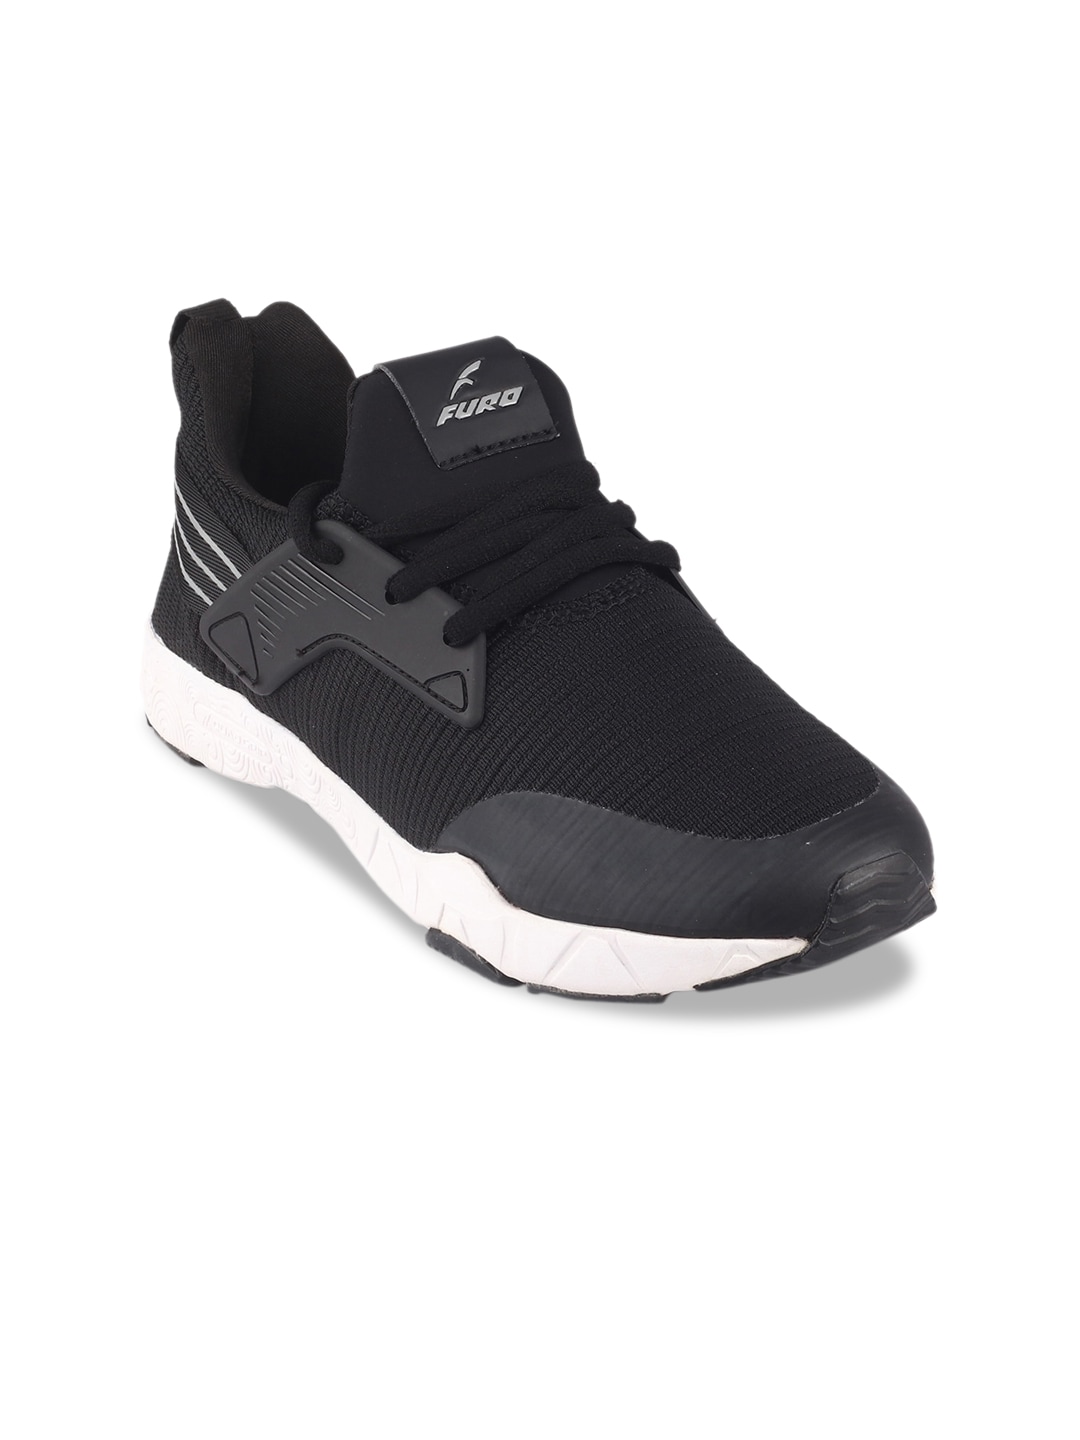 FURO by Red Chief Women Black & White Running Shoes Price in India